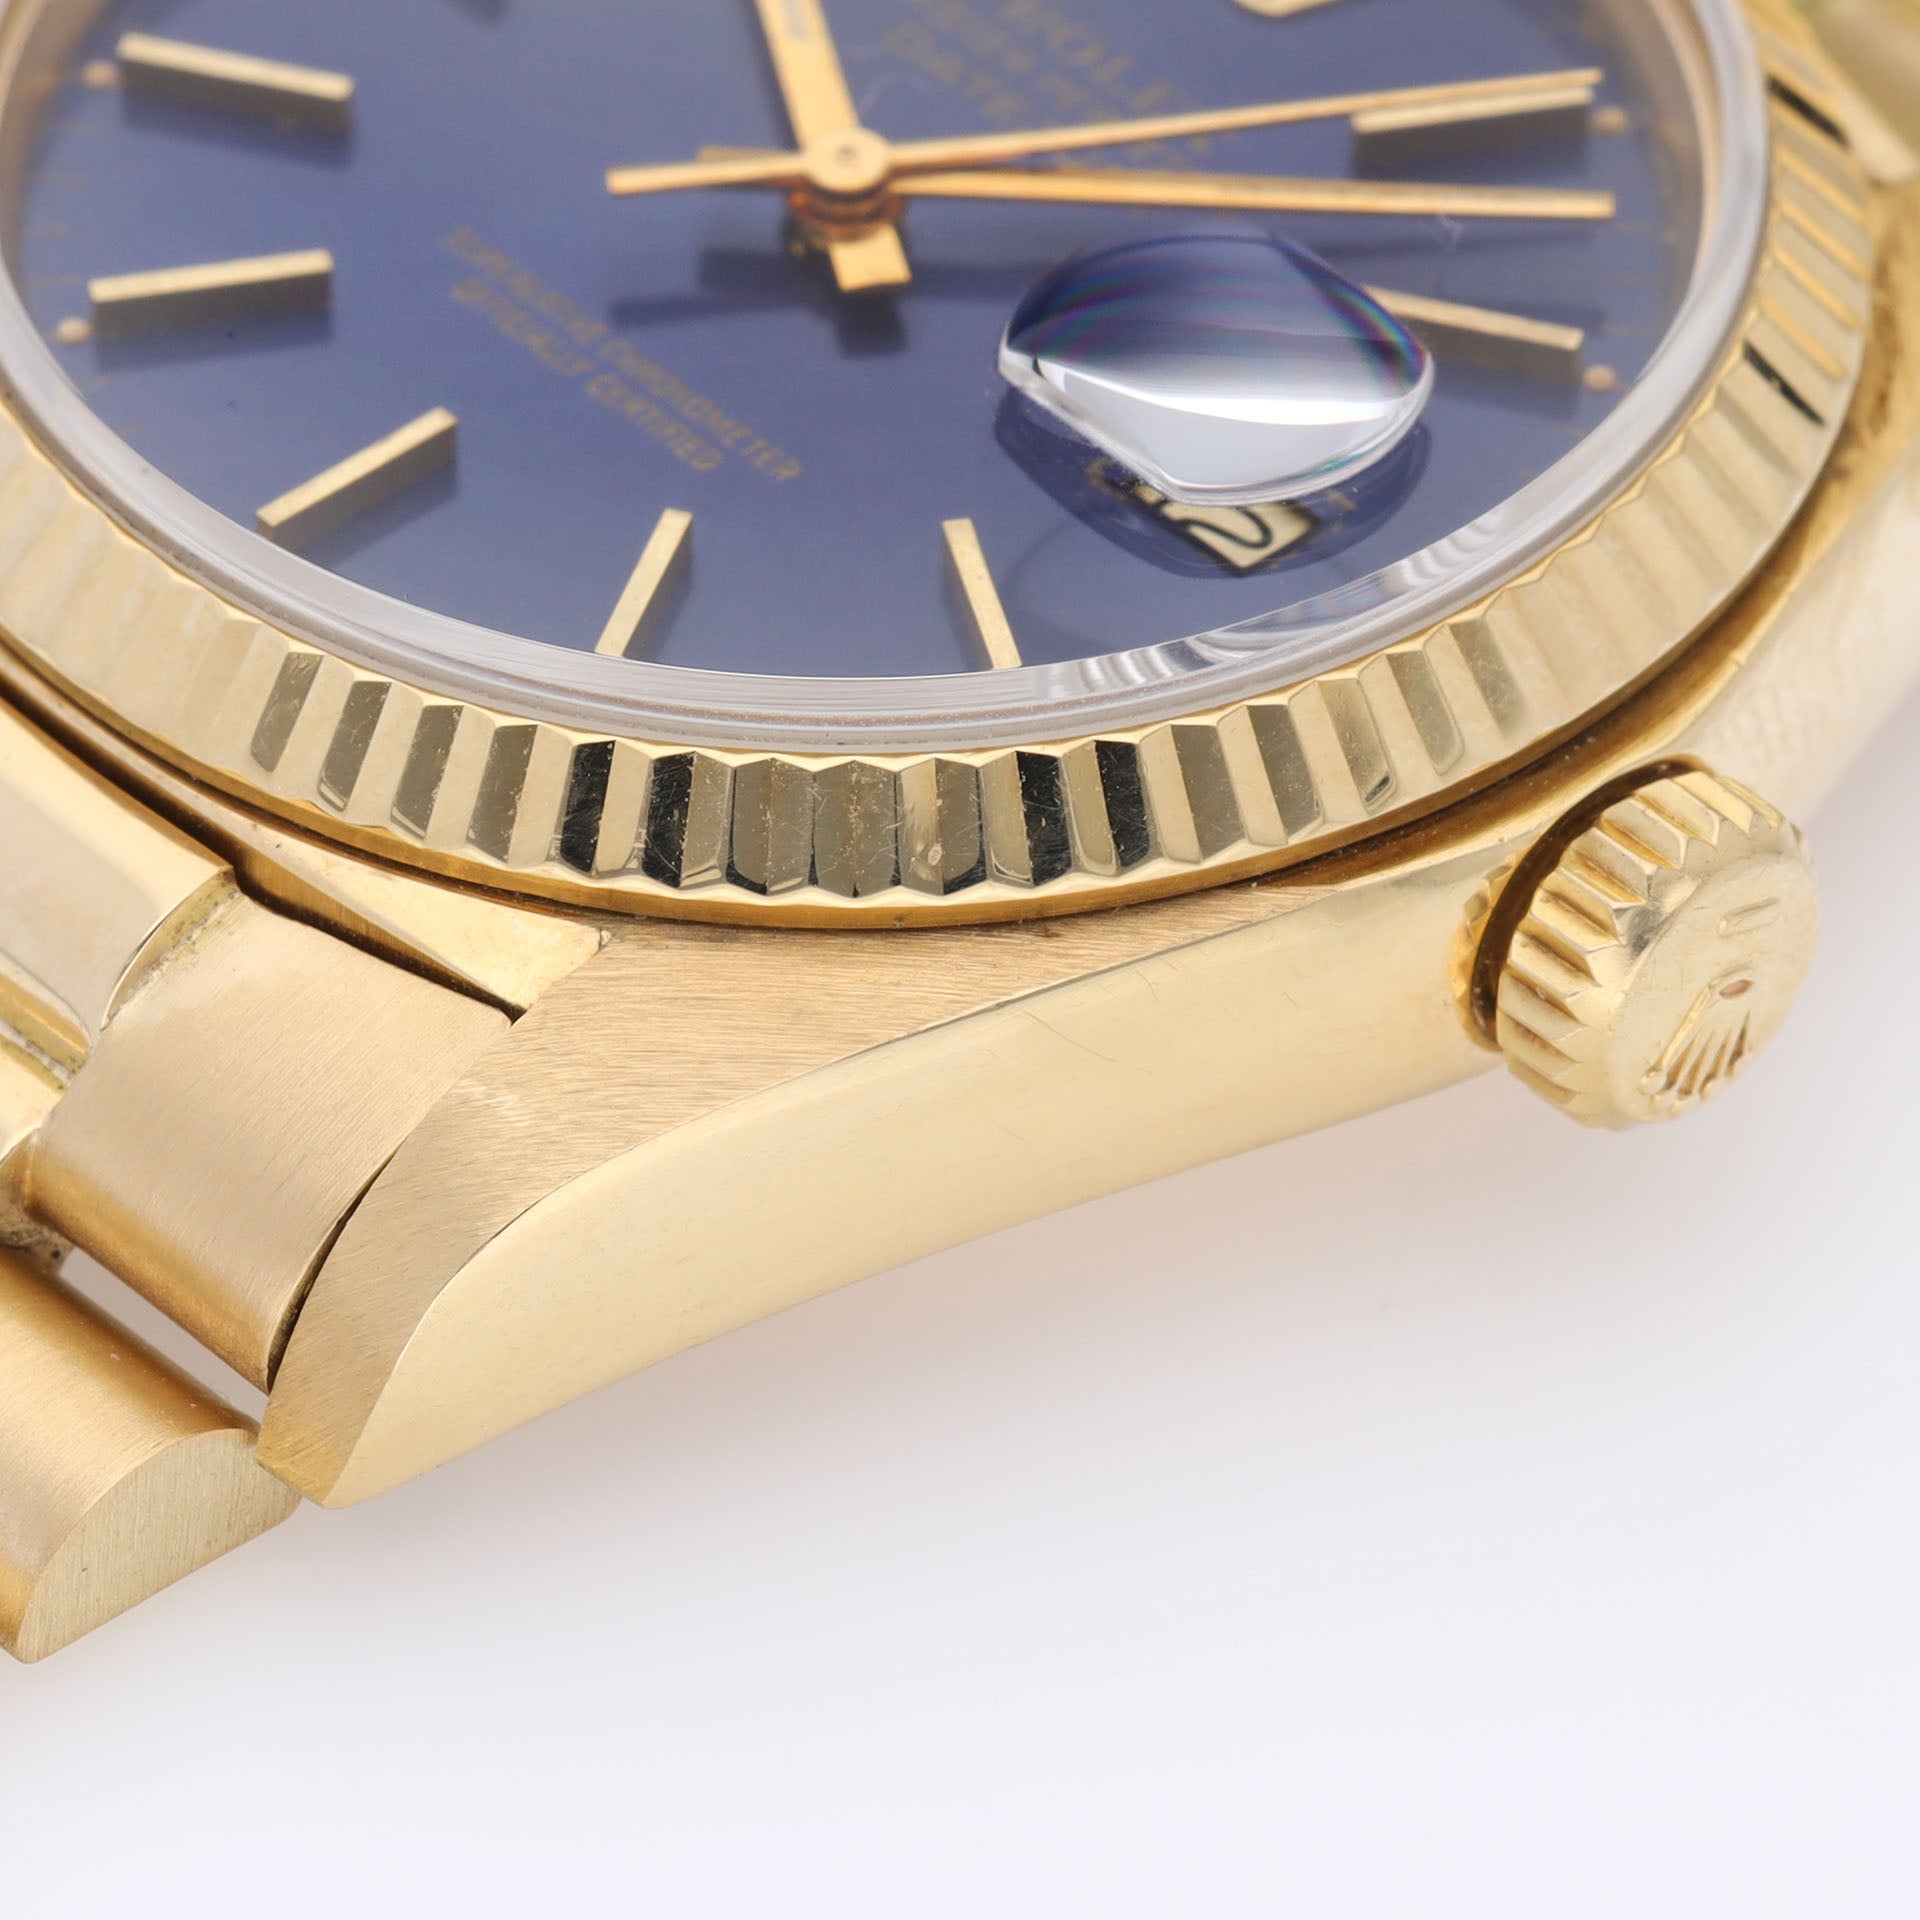 Rolex Datejust 16018 Yellow Gold Blue Dial with Papers